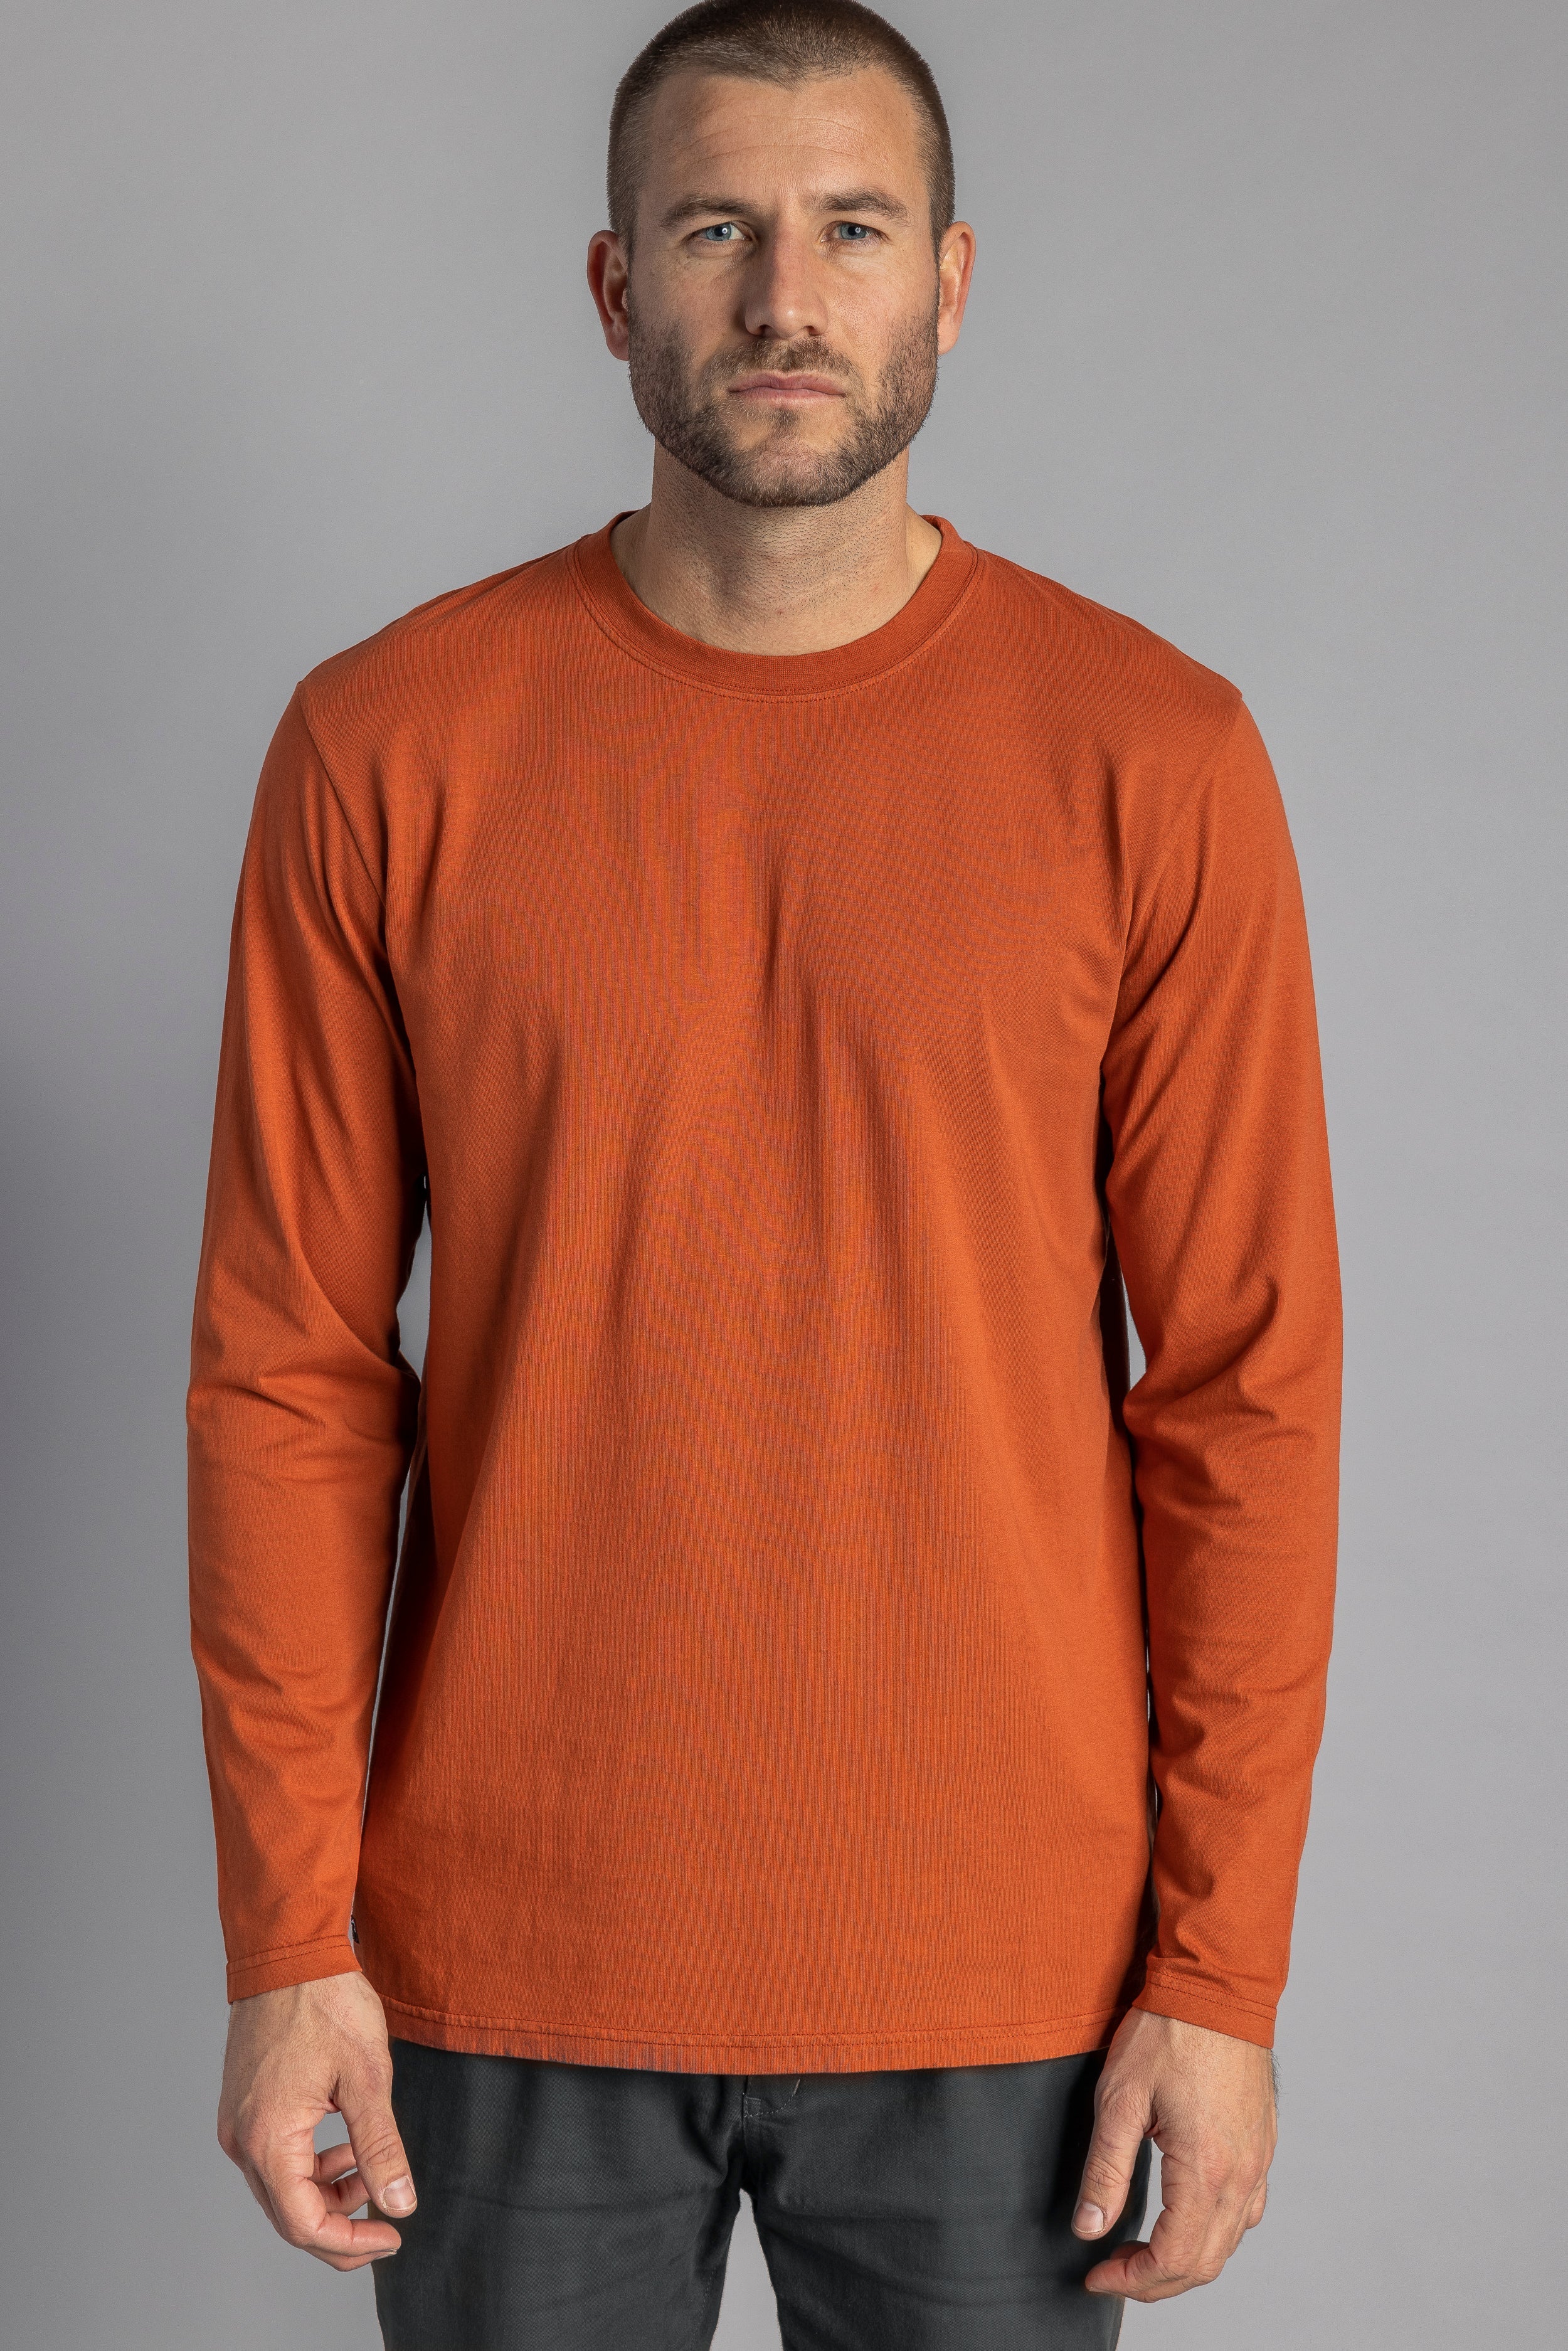 Orange long-sleeved recycled cotton T-shirt from DIRTS